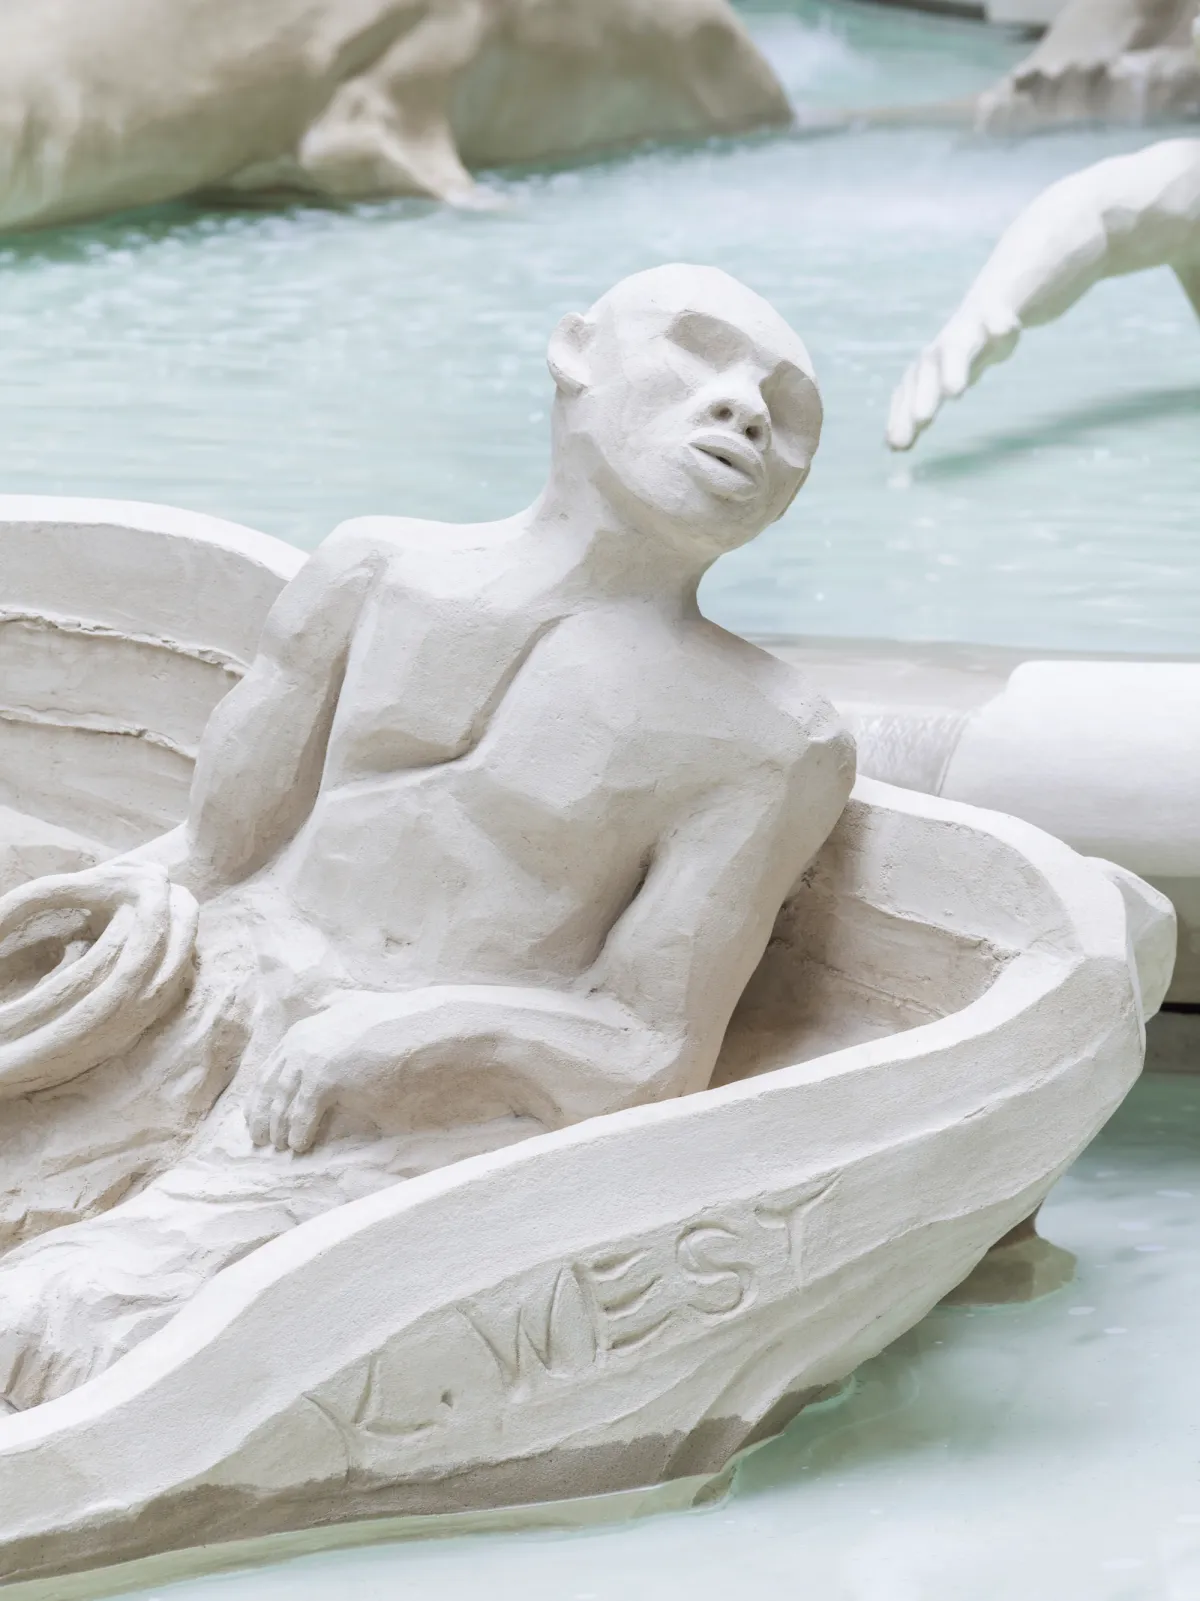 A segment of a detailed, white marble fountain depicts a figure seated in a boat. The setting is indoors with a neutral, softly lit background.